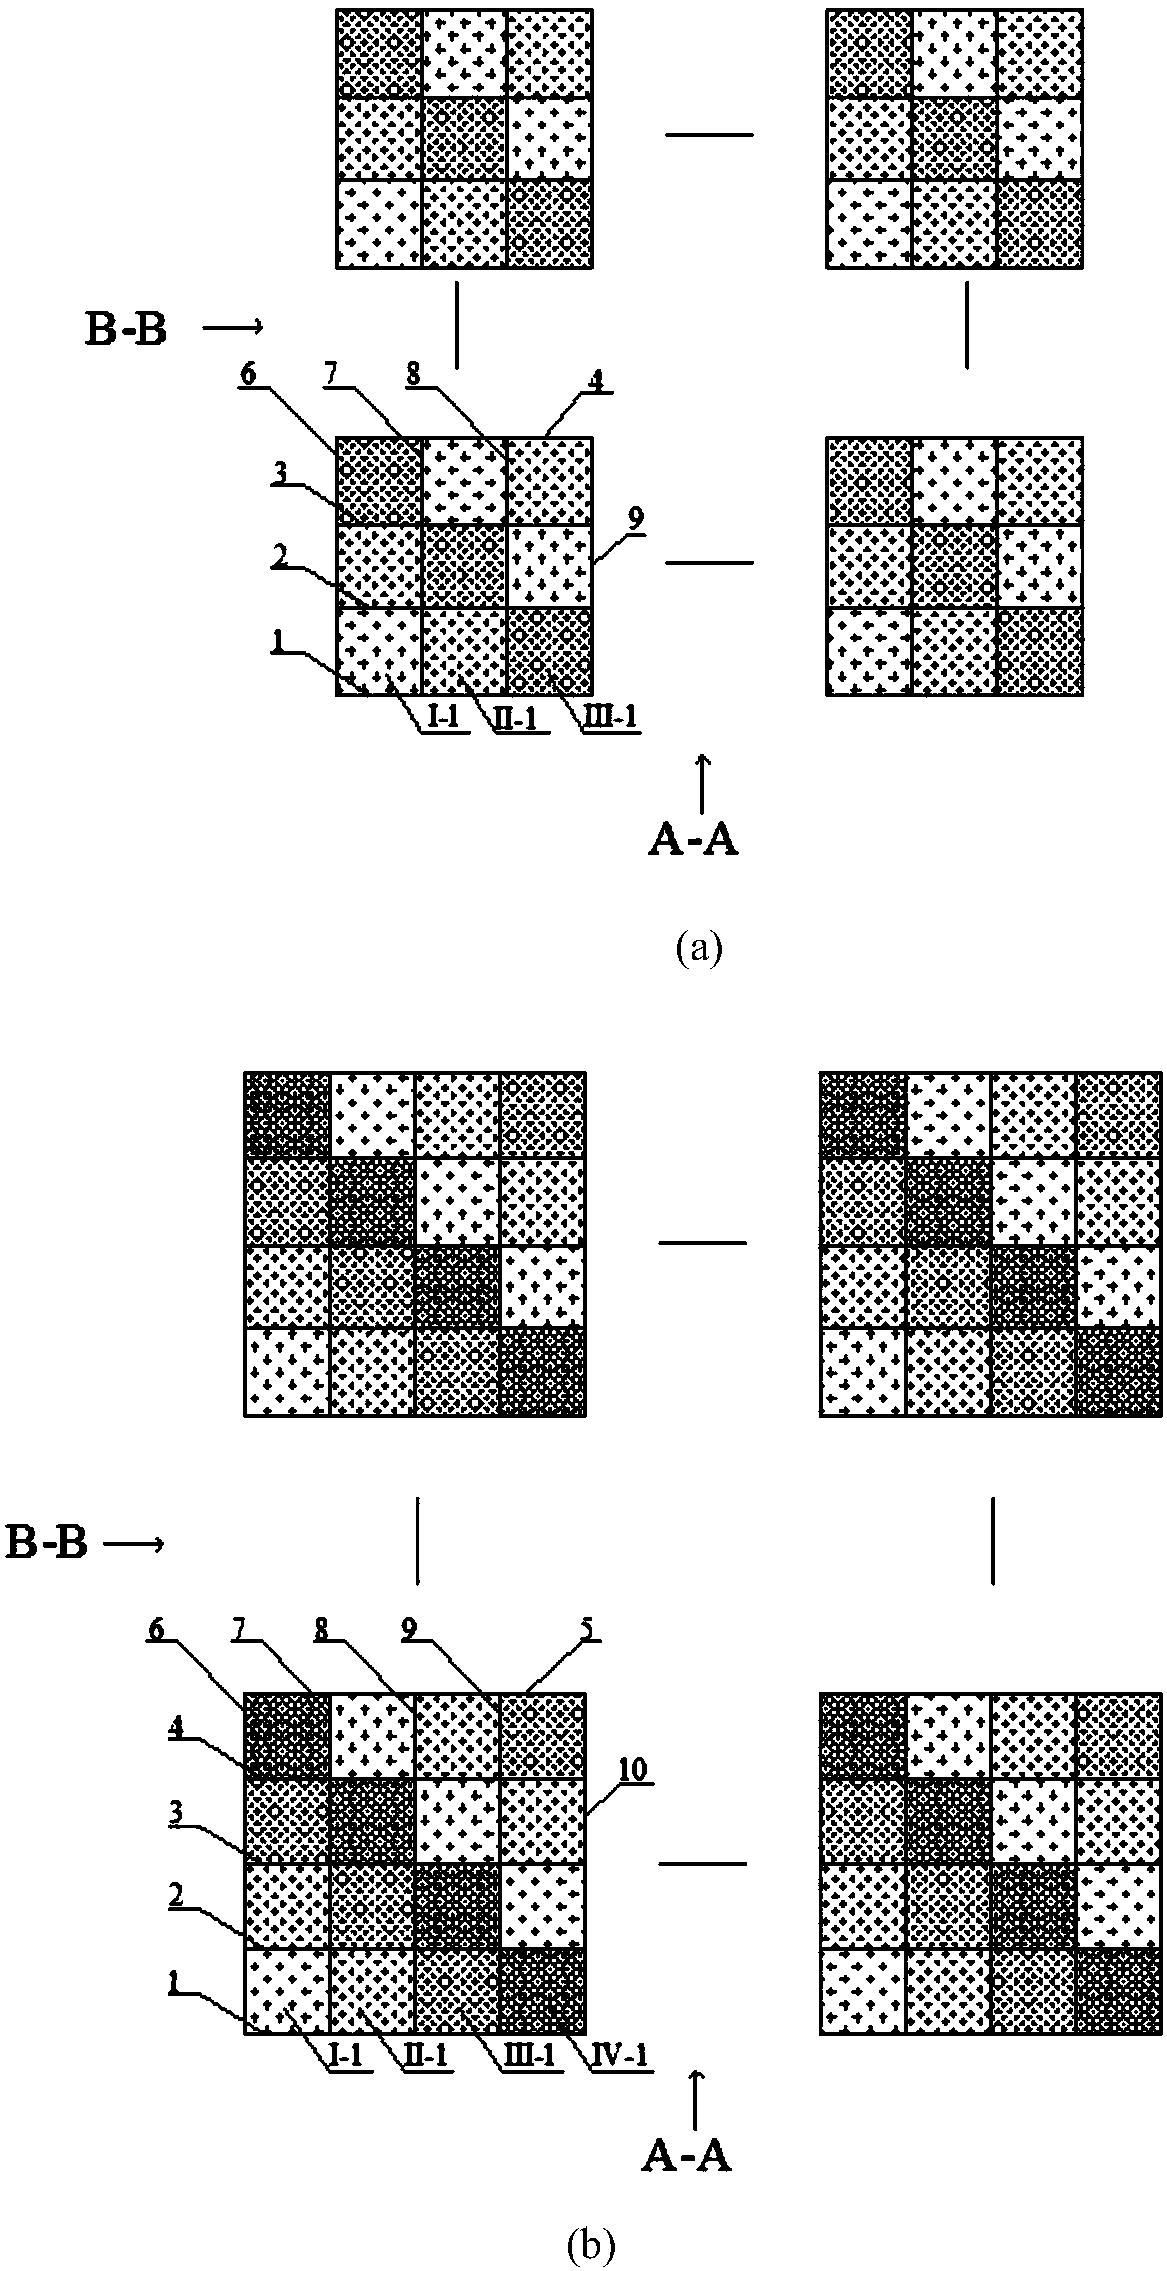 Three-dimensional multi-cavity micro-perforated periodical ultra-wideband sound-absorbing structure